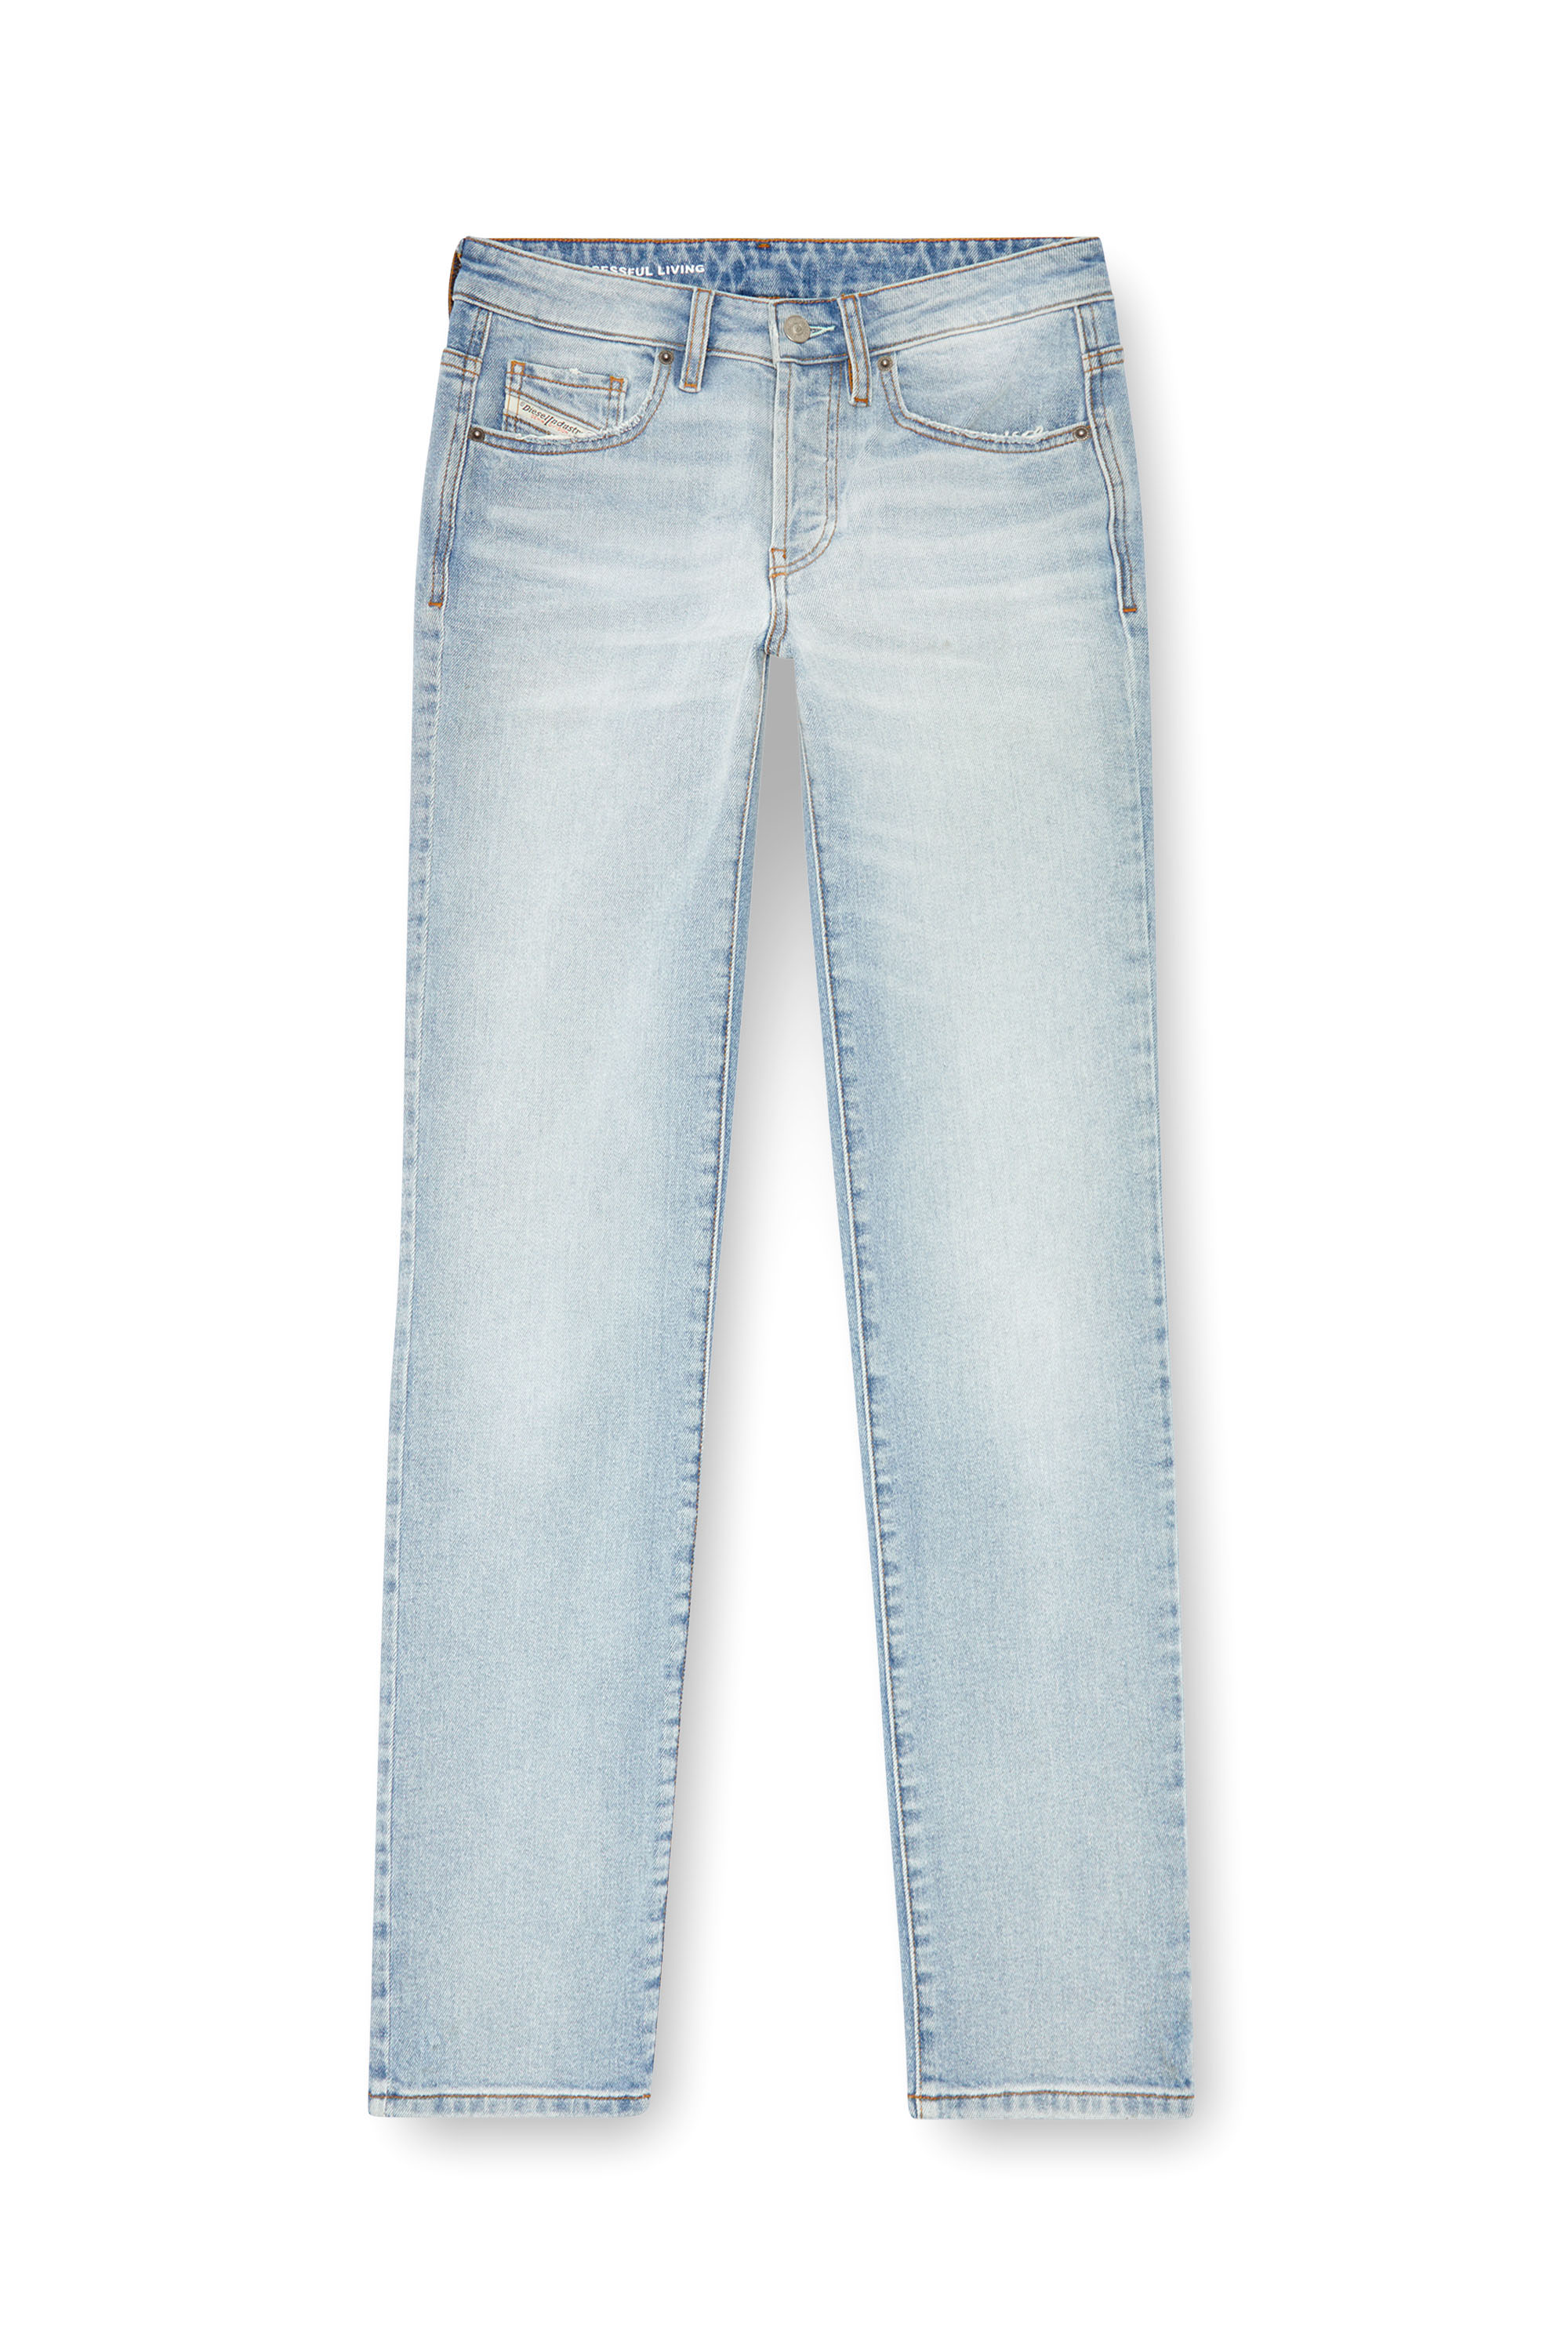 Diesel - Straight Jeans 1989 D-Mine 0GRDM, Mujer Straight Jeans - 1989 D-Mine in Azul marino - Image 5